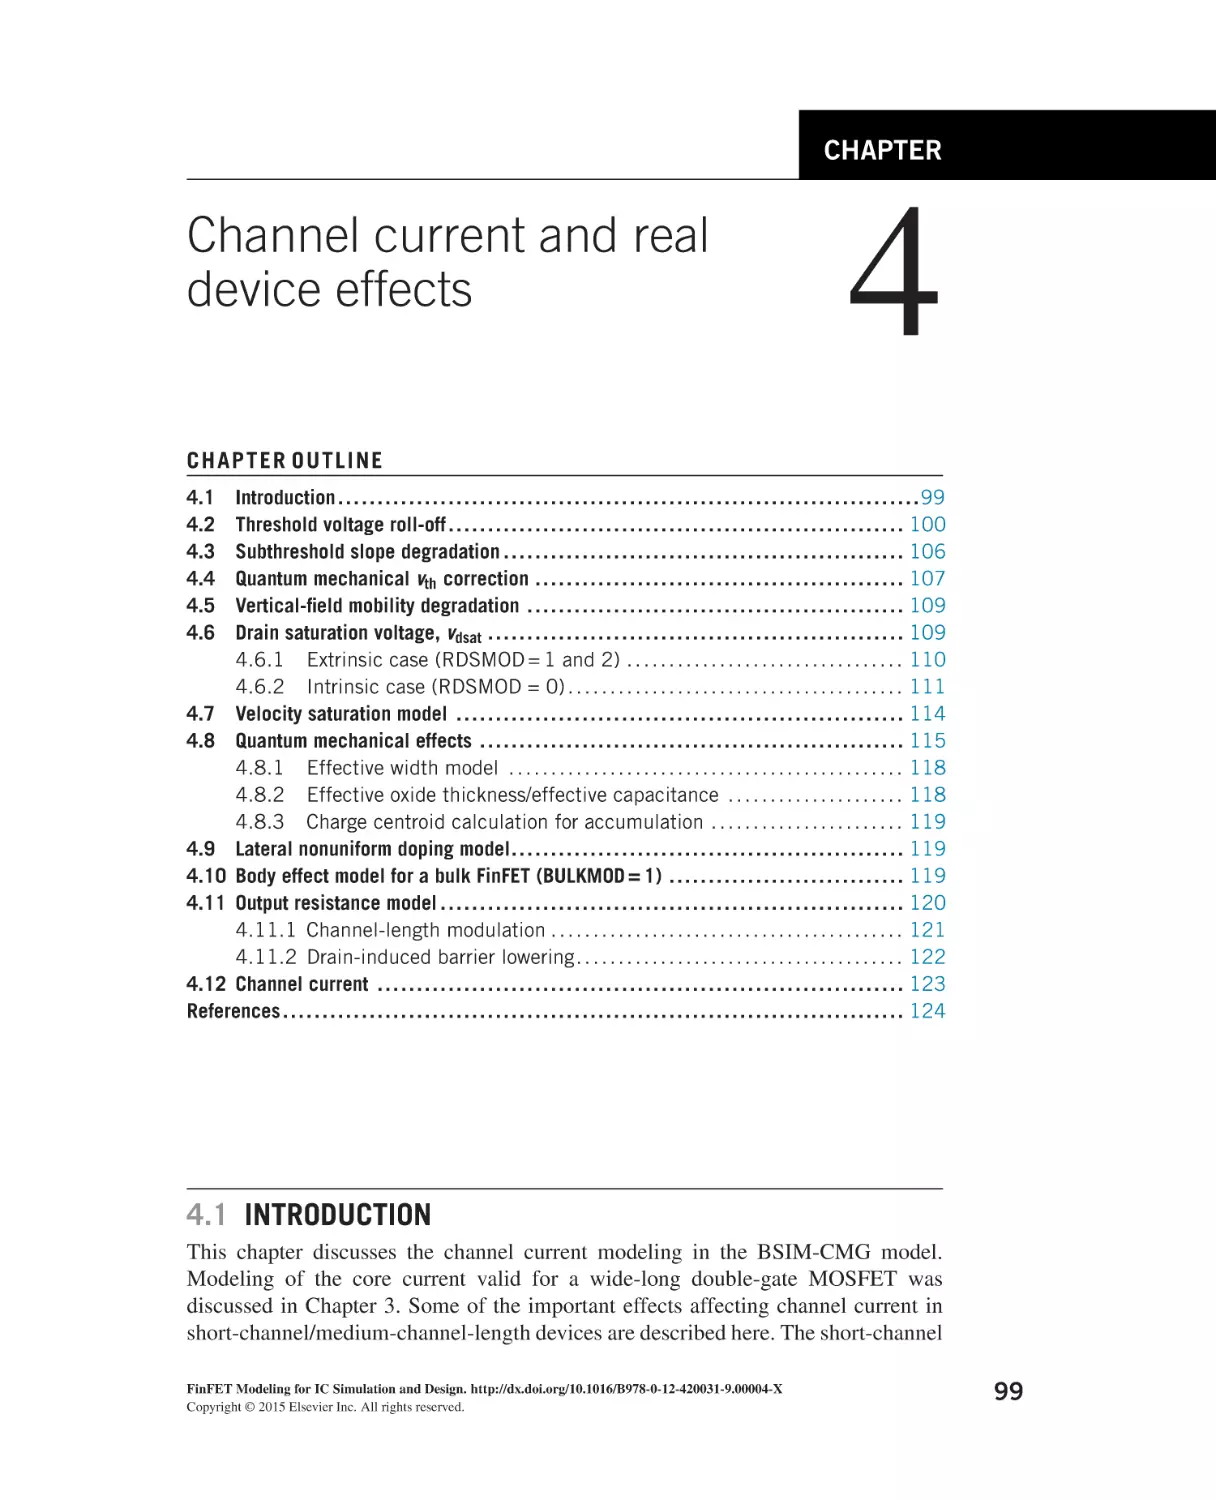 Channel current and real device effects